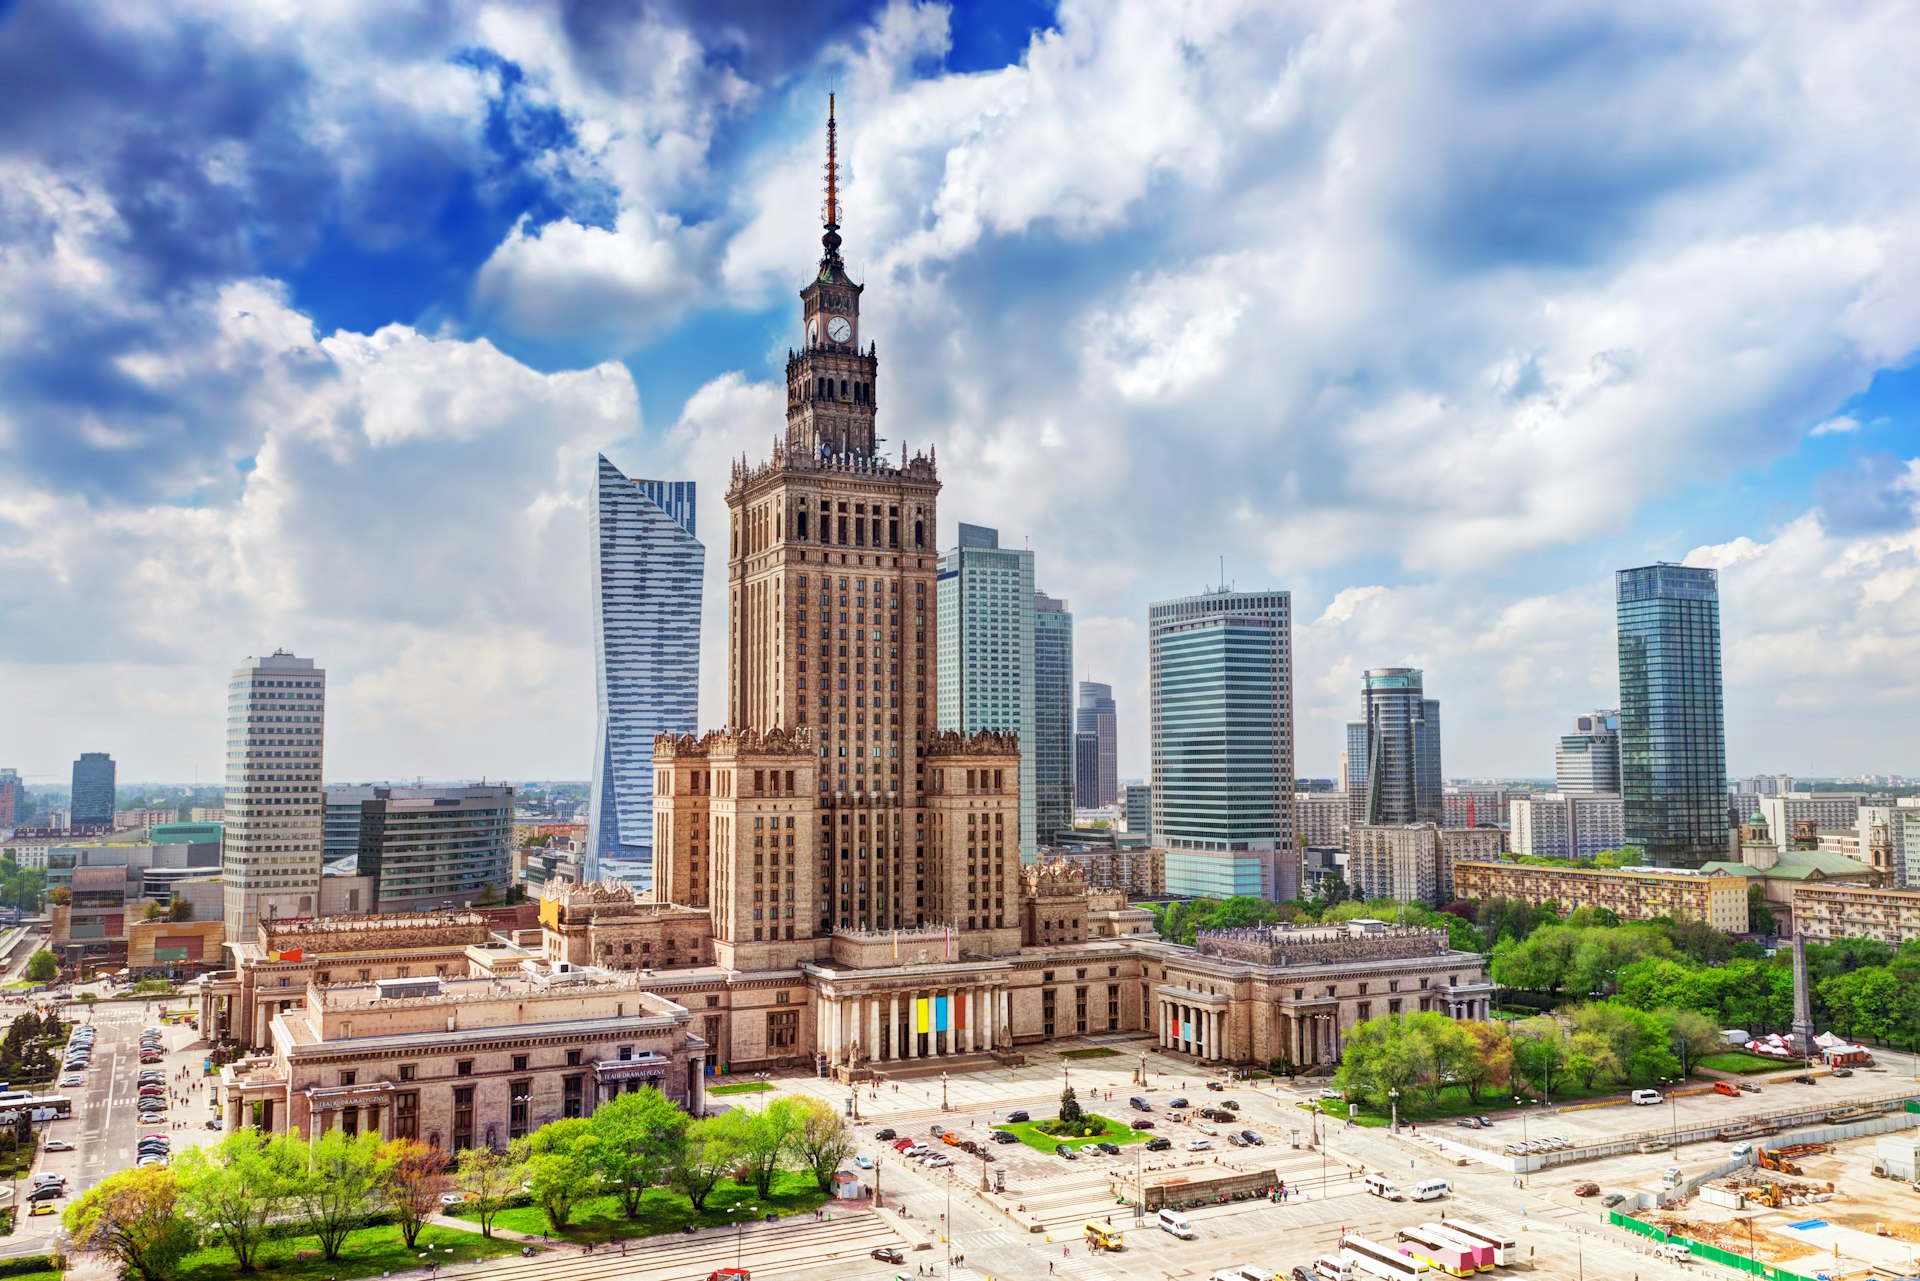 A huge ‎1950s skyscraper, the Palace of Culture & Science, is surrounded by modern skyscrapers in Warsaw.